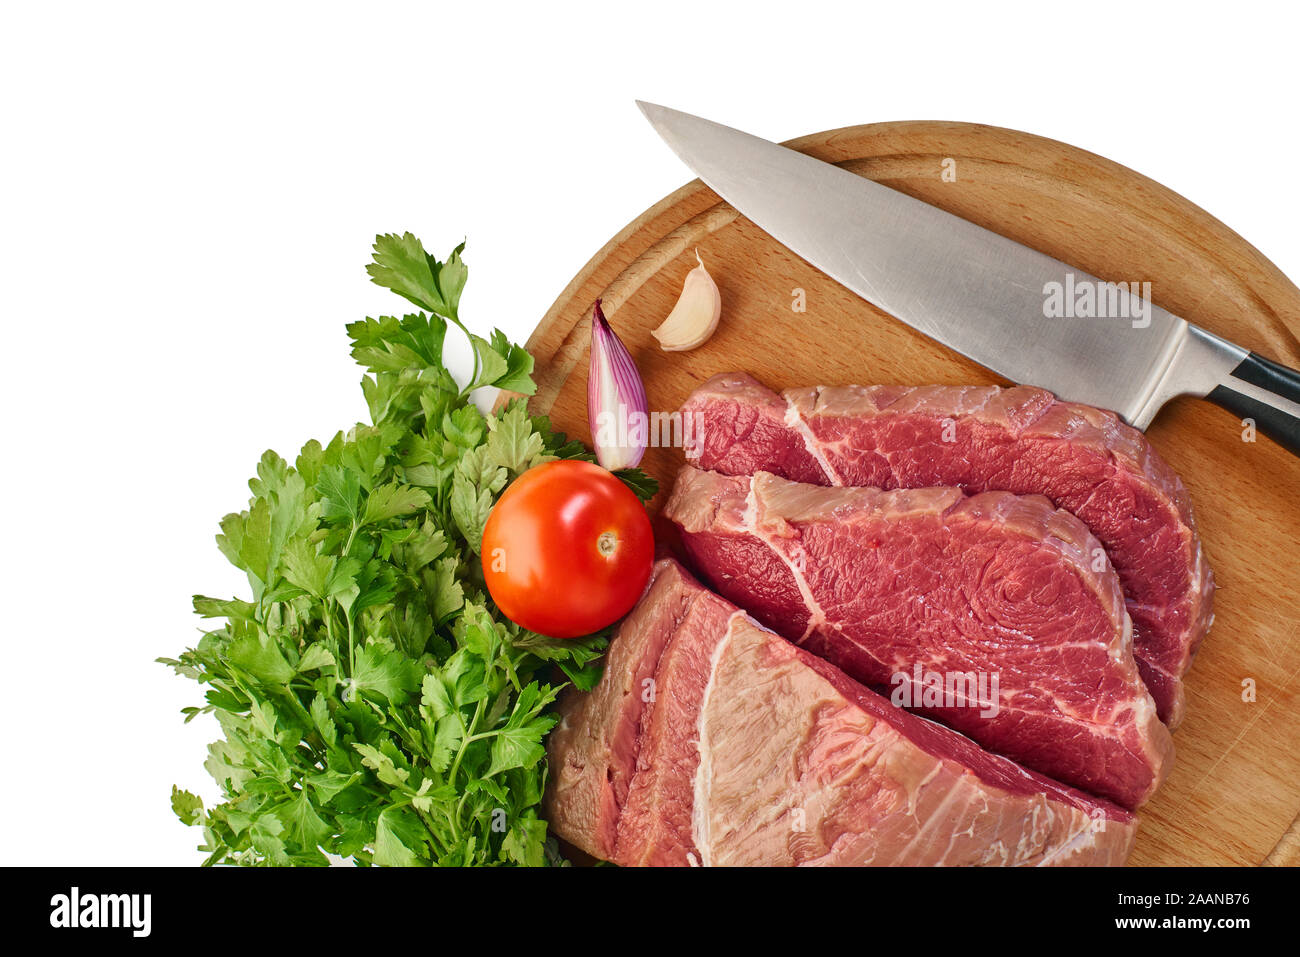 https://c8.alamy.com/comp/2AANB76/raw-meat-with-vegetables-and-knife-on-the-board-2AANB76.jpg